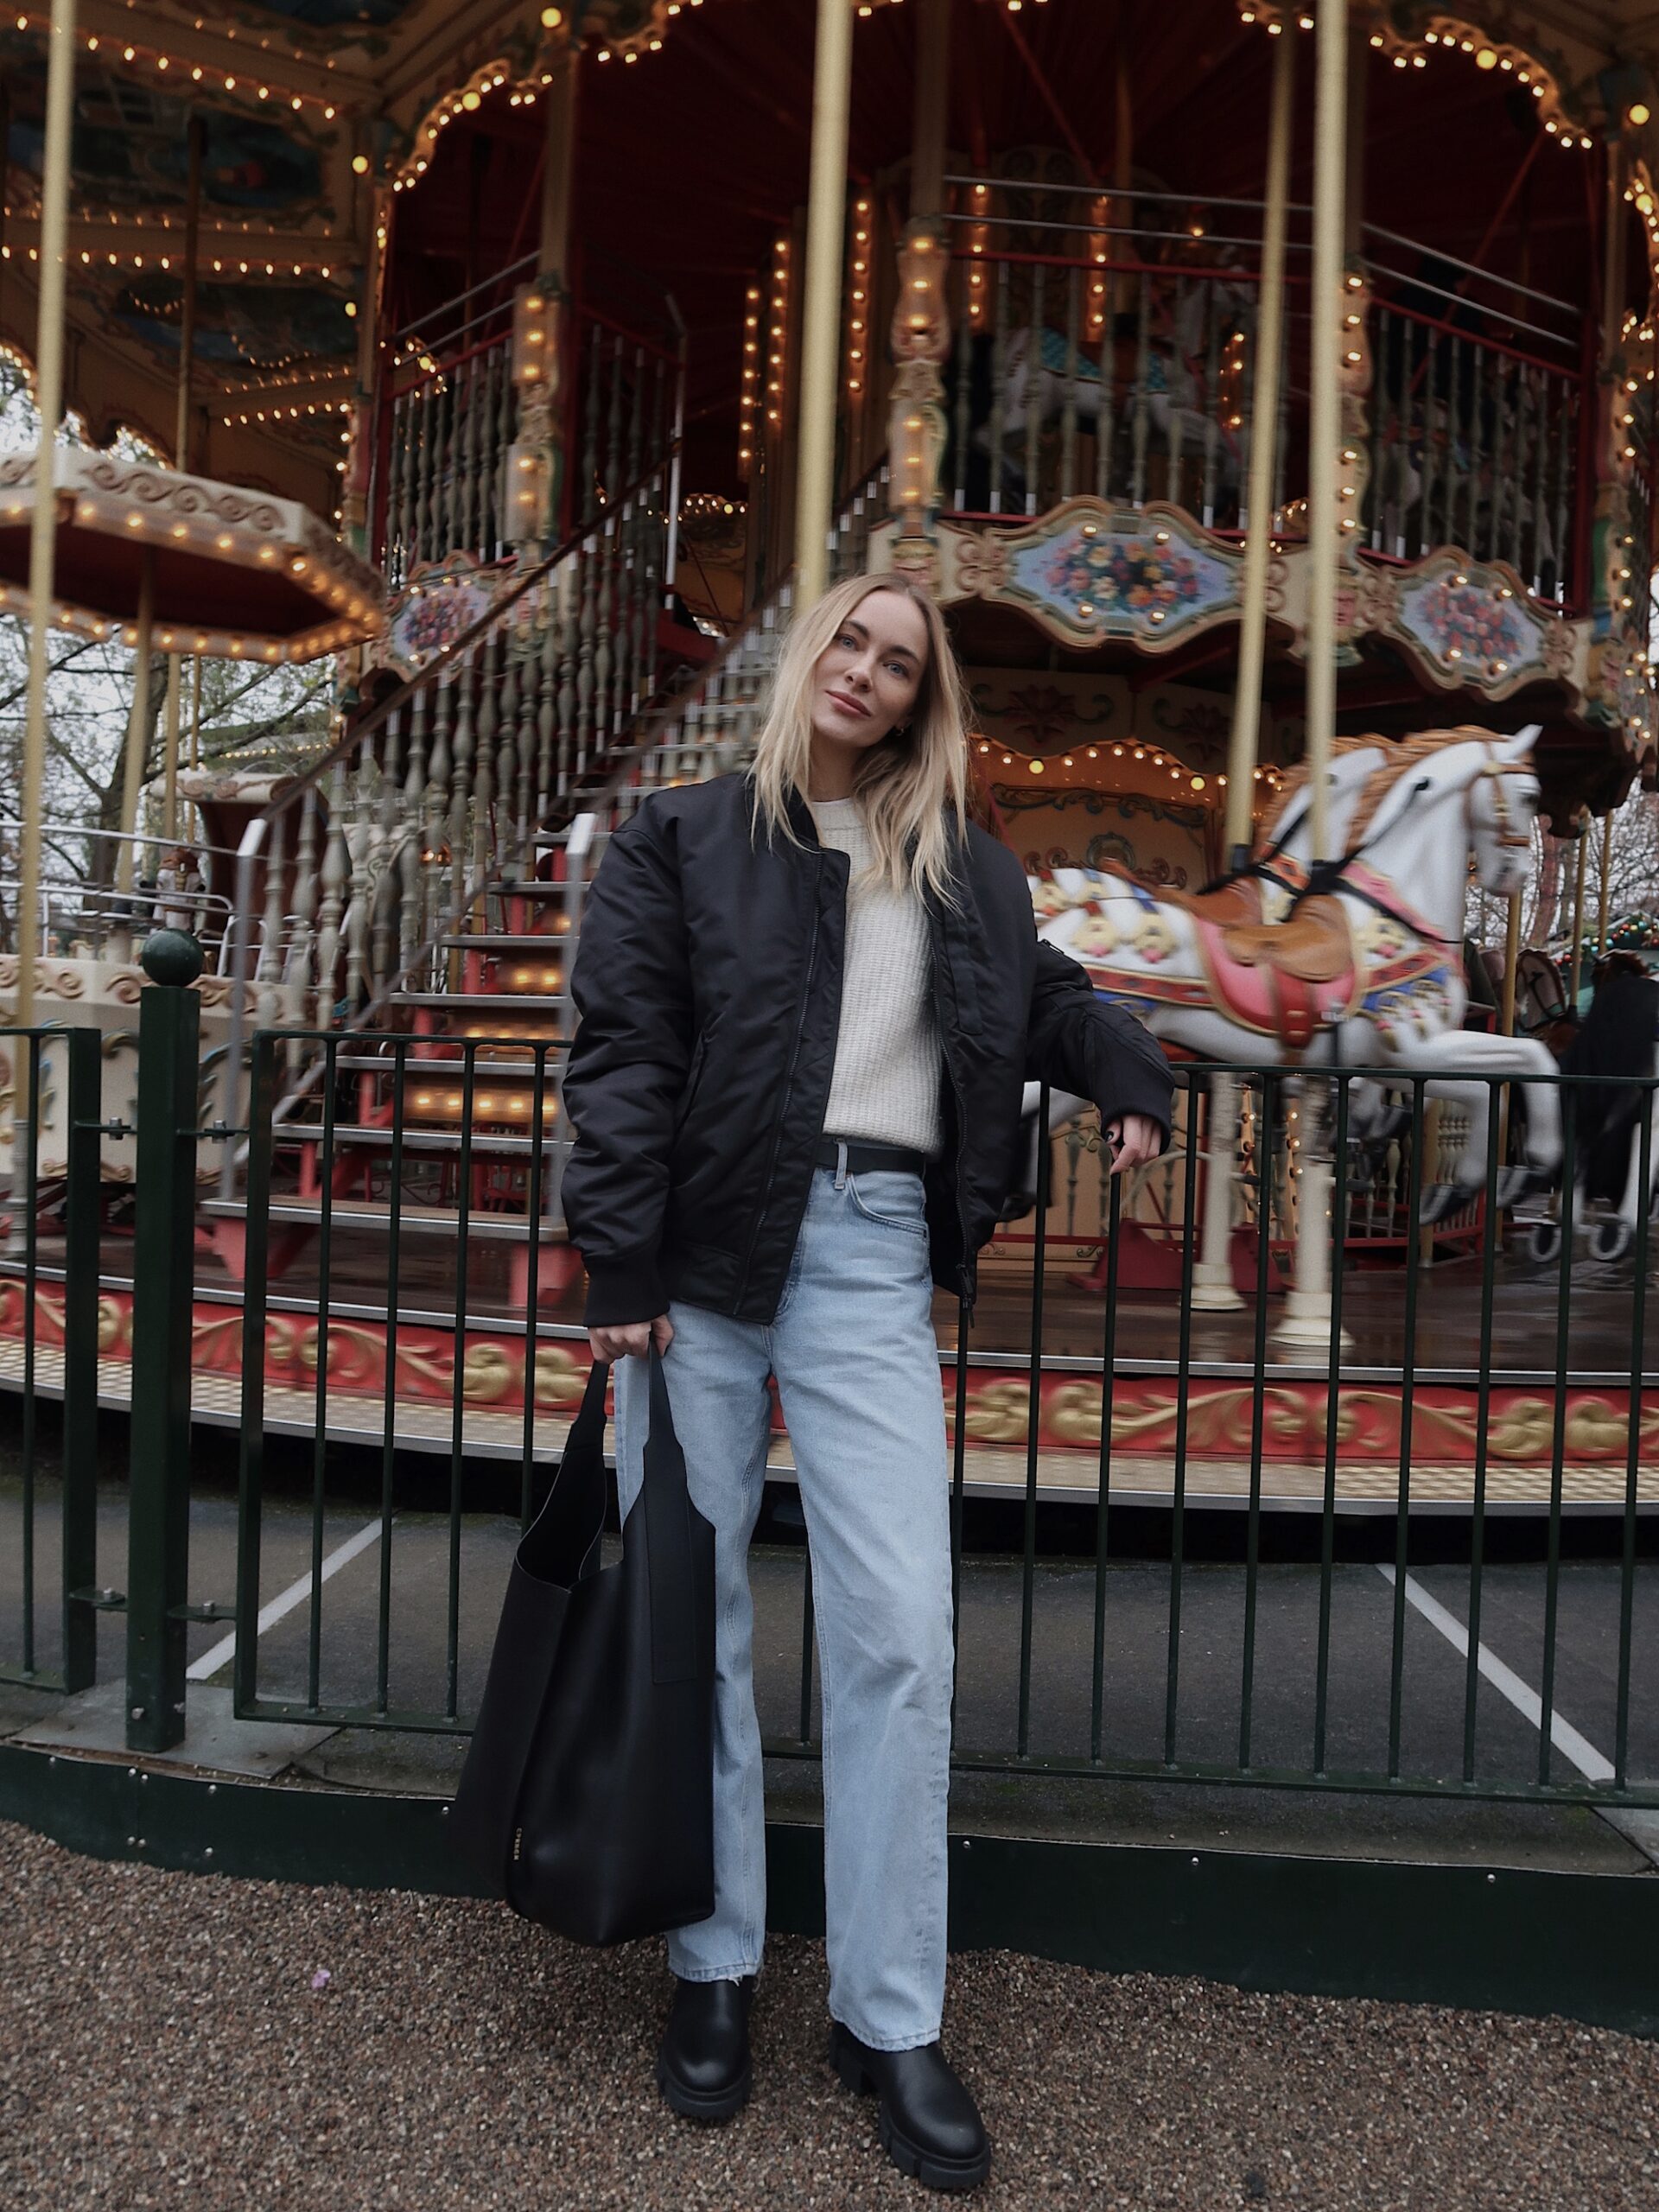 Marie Hindkaer at Tivoli in Copenhagen. She is standing in front of one carousel and wearing a casual Look combinated with CPH500 vitello black and CPH Bag 1 vitello black.